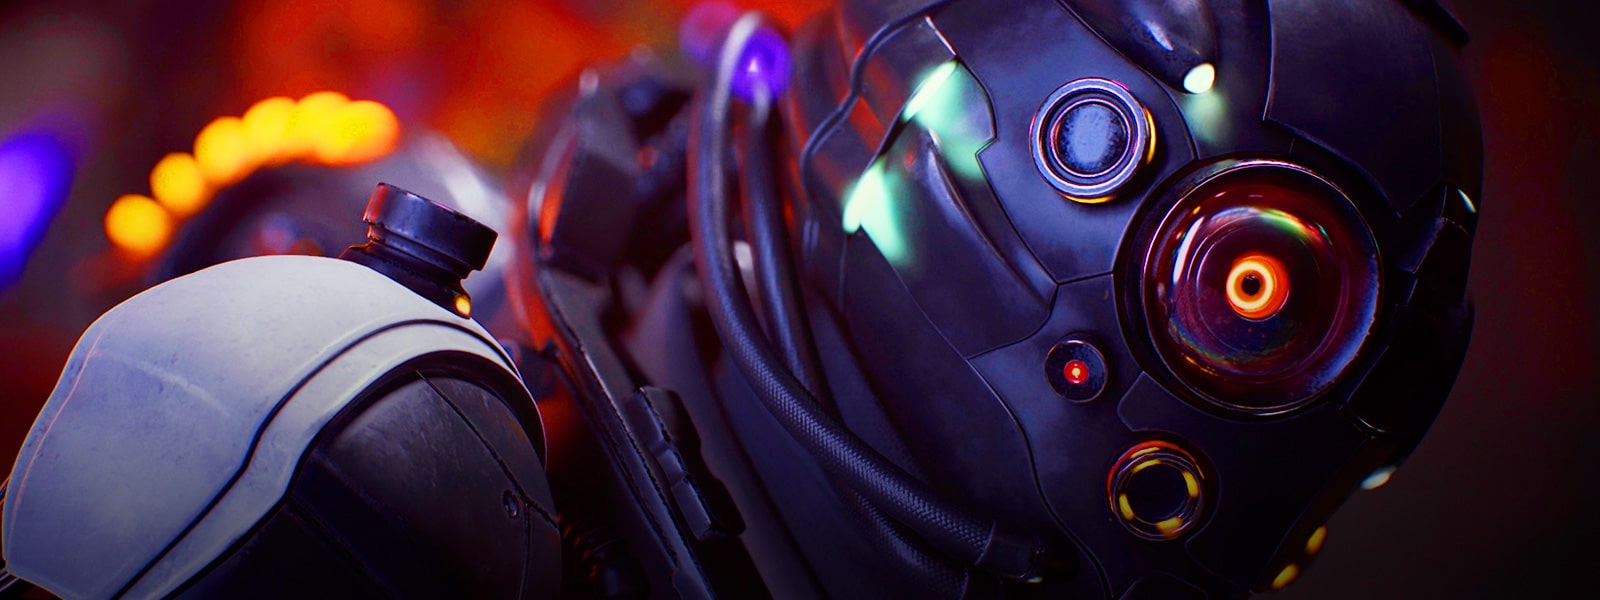 Close up shot of a sci-fi game character wearing a helmet with circular features.